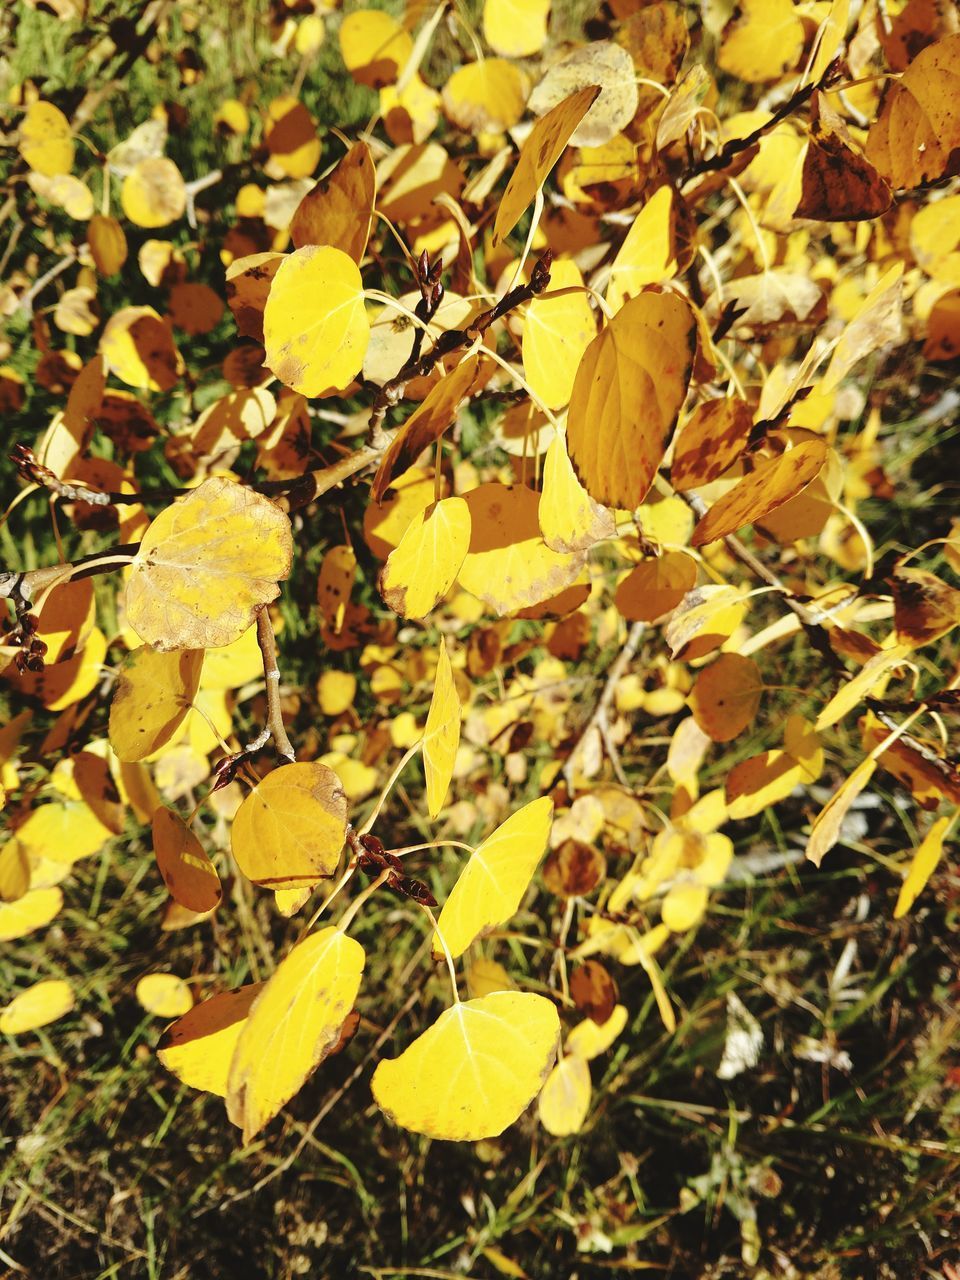 CLOSE-UP OF YELLOW LEAVES ON PLANT